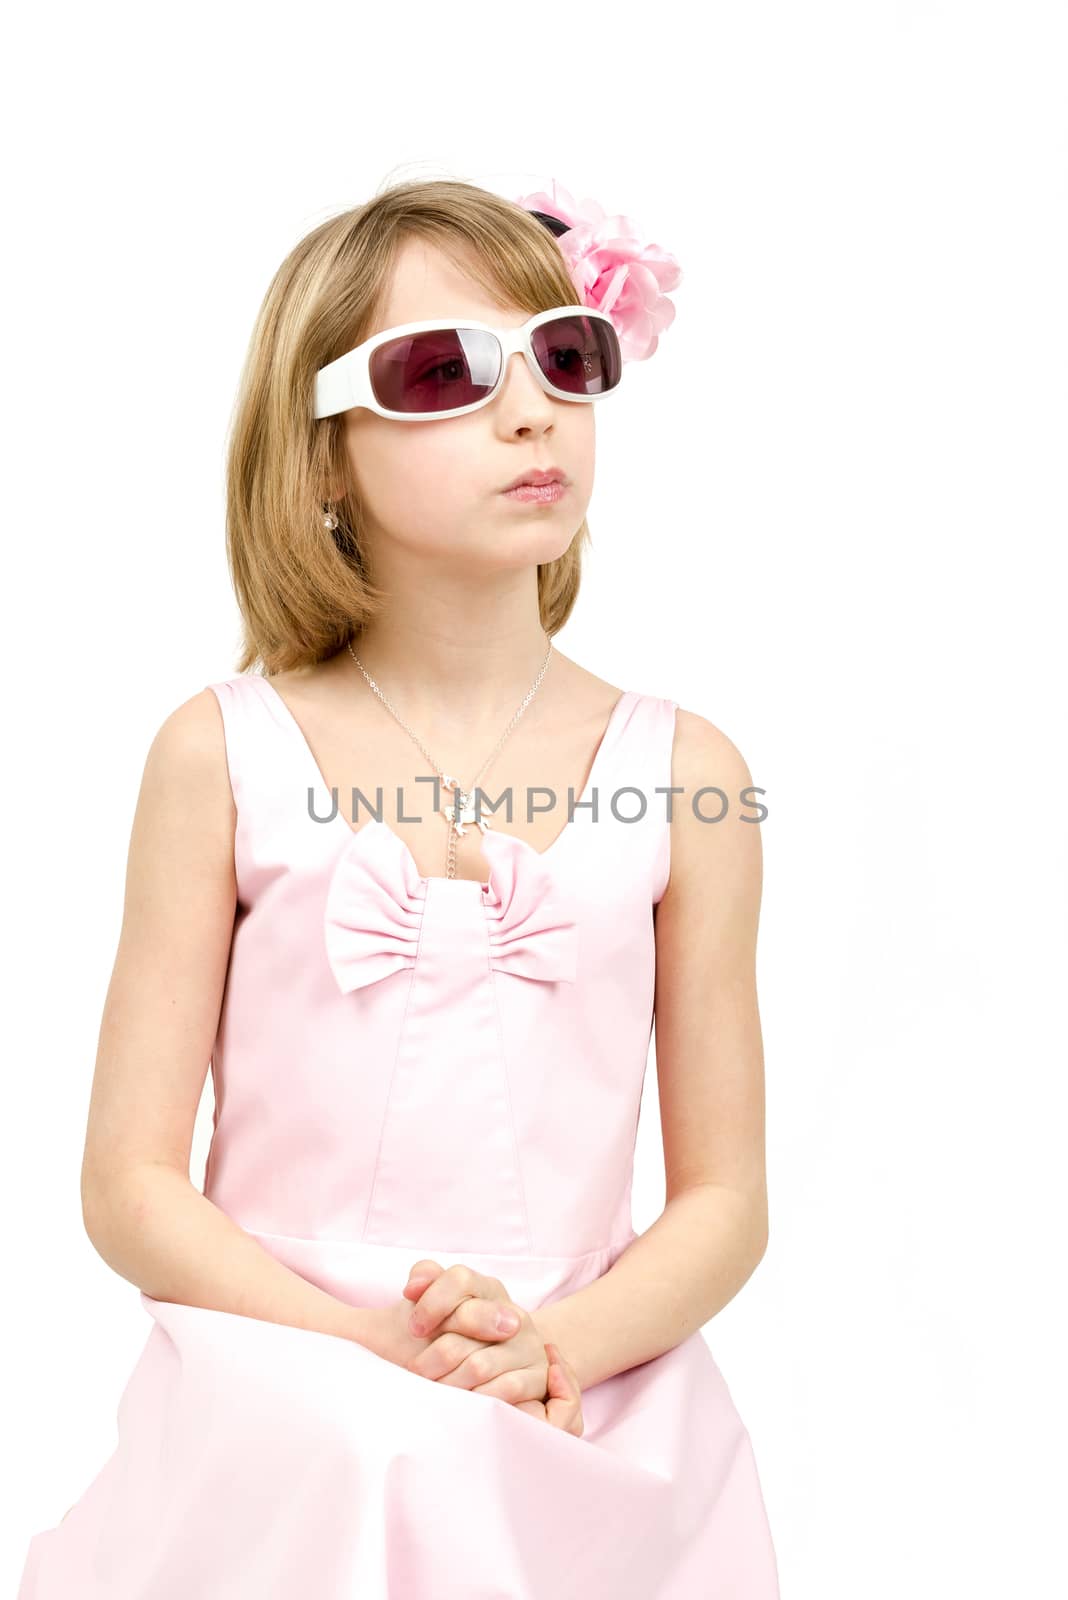 Studio portrait of young beautiful girl with sun eyeglasses on white background